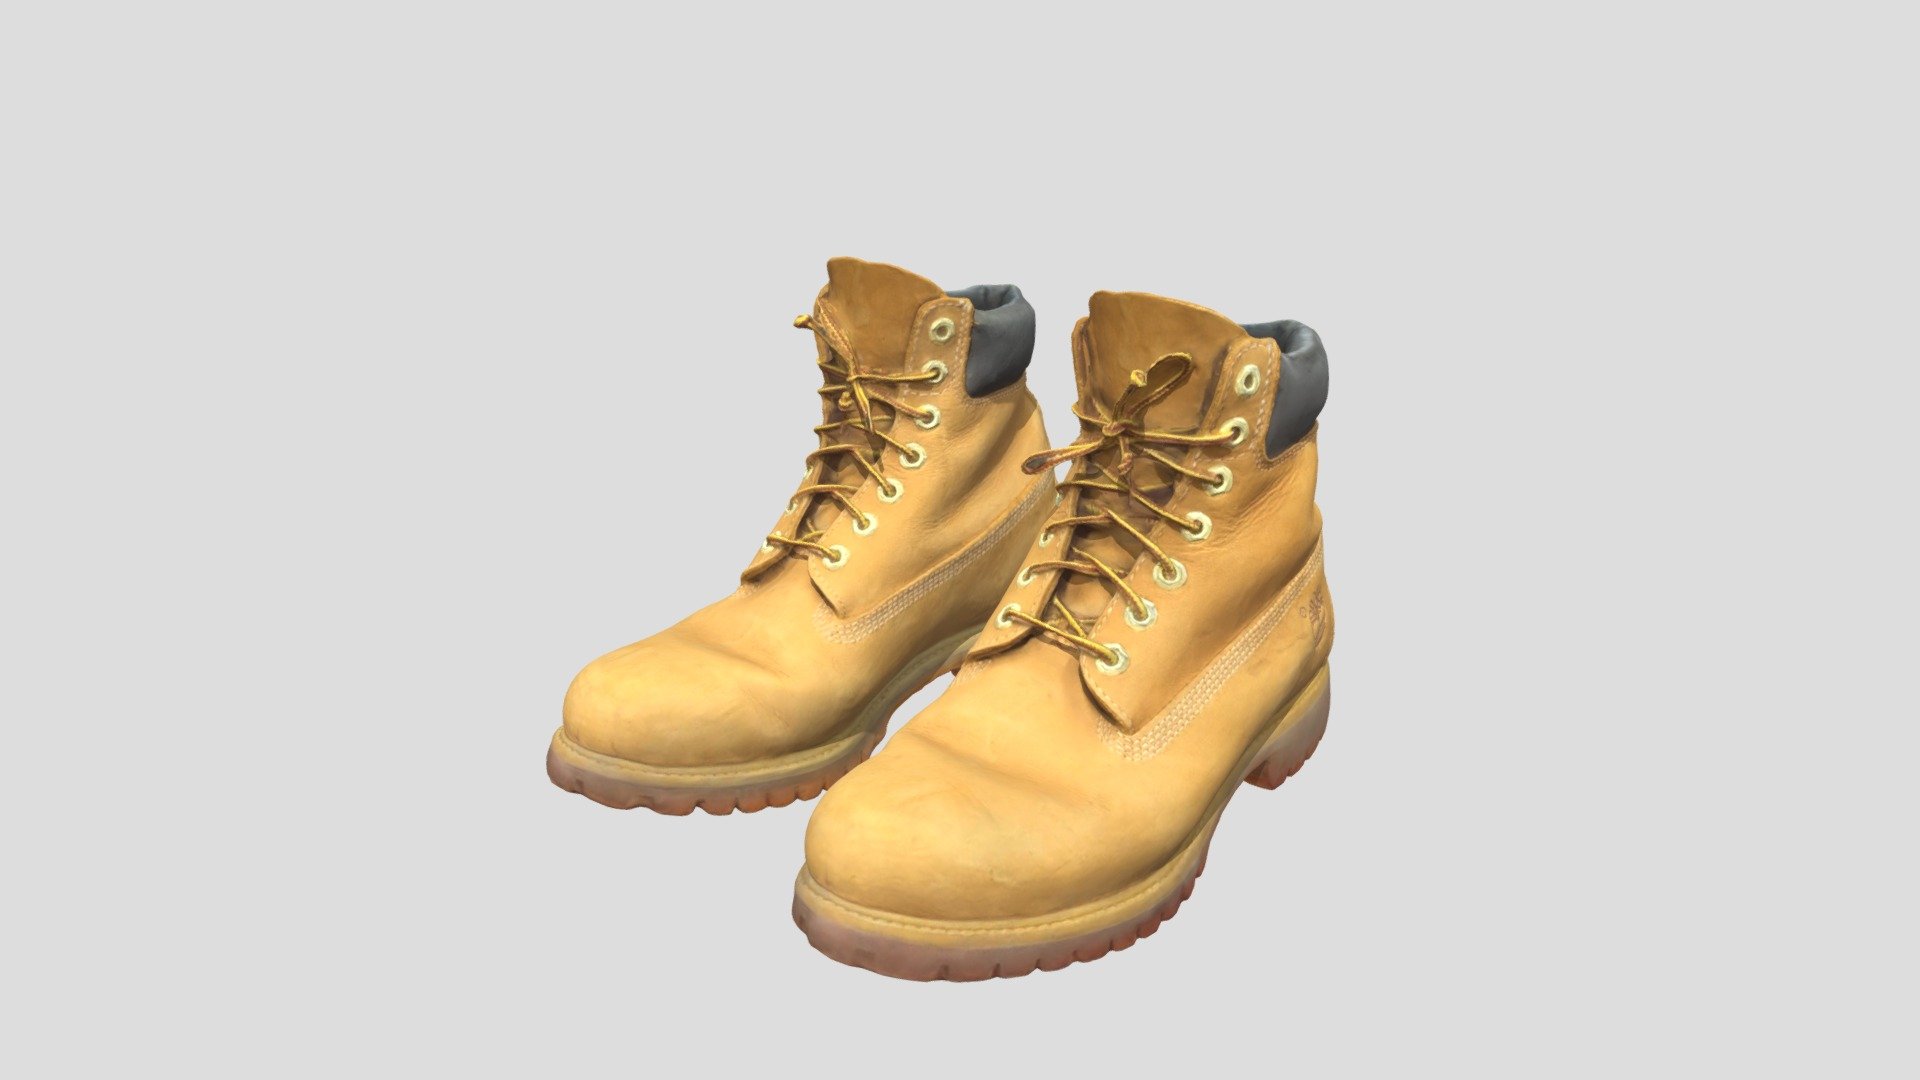 Hello, everyone! A new 3D scan model was created through the VRIN scan application of Lesterbuilder AI. 
The model I will share this time is a Timberland Shoes. 
The VRIN application scans even the smallest details and enables realistic reproduction of the model. 
Experience the incredible performance of VRIN with this model. 
Thank you!

📲VRIN - 3D World [App Store]: https://apps.apple.com/us/app/vrin-3d/id6462086947 - Timberland_Scan Model - Buy Royalty Free 3D model by rebuilderai (@RebuilderAI-vrin) 3d model